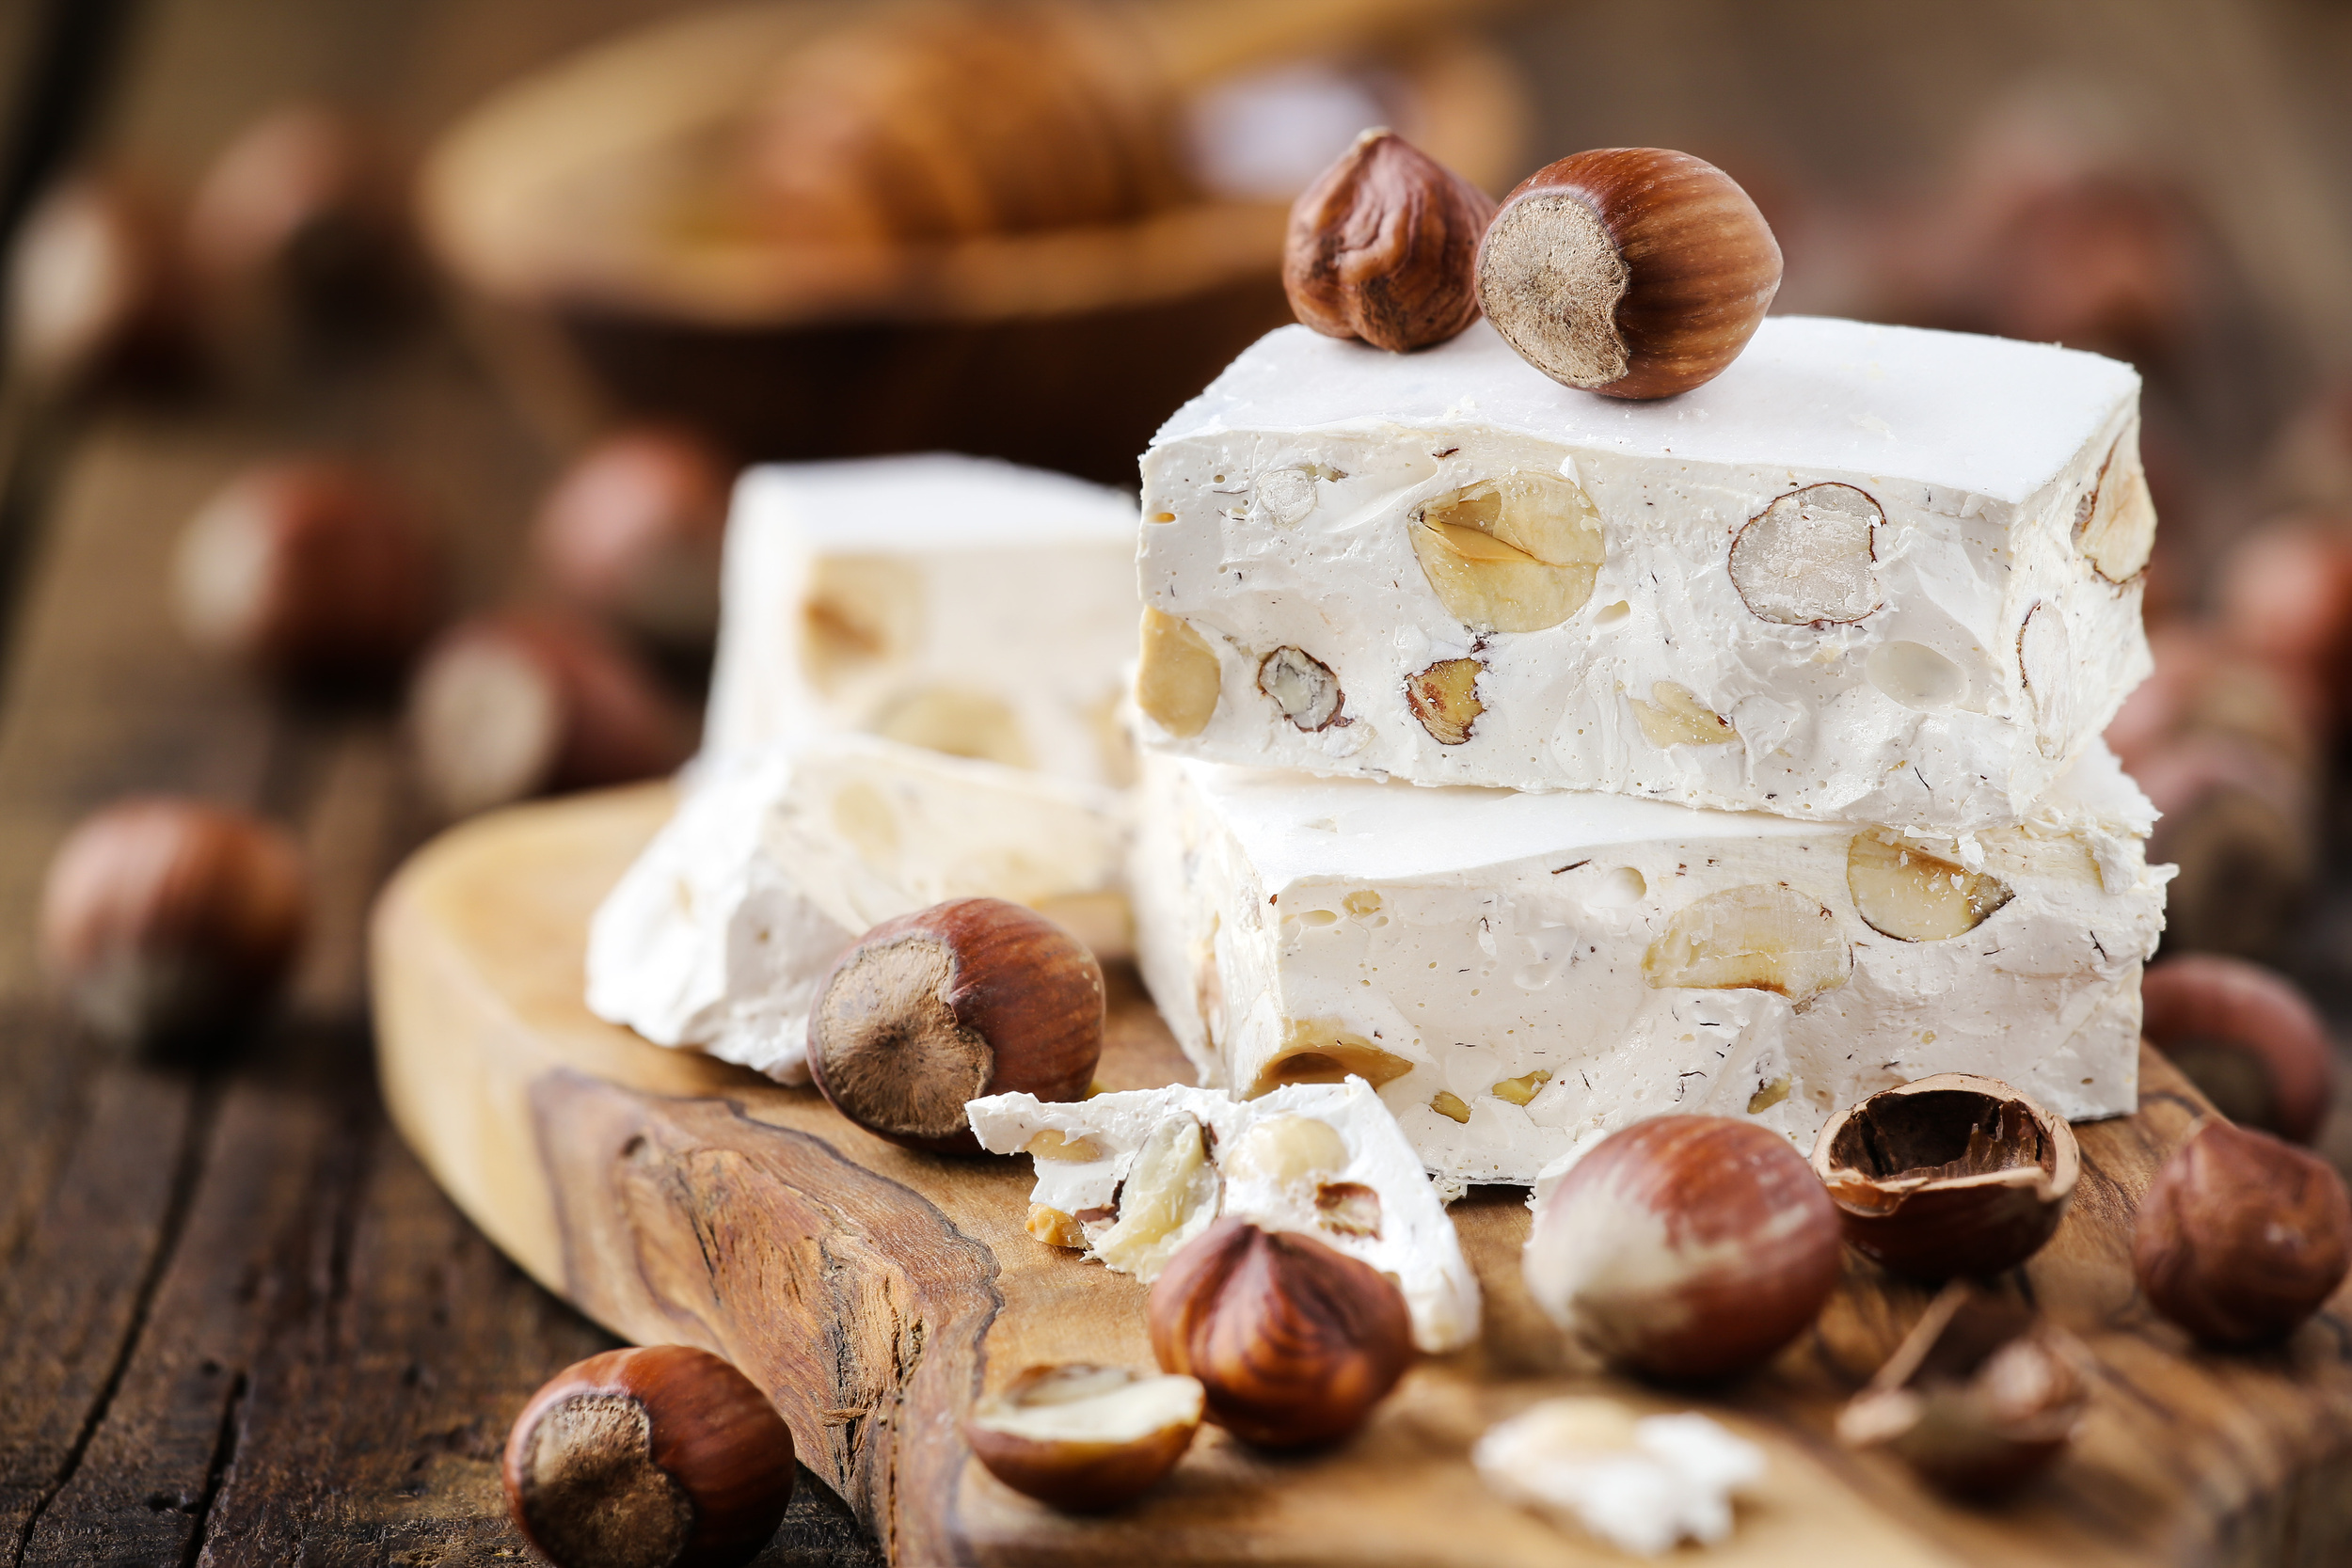 <p>You probably think of nougat as the fluffy, whipped stuff inside a Three Musketeers or Snickers bar, but Italian nougat is much chewier, or even hard and crunchy, in some cases. (You’ll also find variations of this nut-filled nougat in Spain and Portugal.) <a href="https://xoxobella.com/homemade-torrone-italian-nut-nougat/"><span>Try this version from xoxoBella</span></a>, which recommends roasted almonds, pistachios, hazelnuts, or pecans…or all of the above.</p><p><a href='https://www.msn.com/en-us/community/channel/vid-cj9pqbr0vn9in2b6ddcd8sfgpfq6x6utp44fssrv6mc2gtybw0us'>Did you enjoy this slideshow? Follow us on MSN to see more of our exclusive lifestyle content.</a></p>